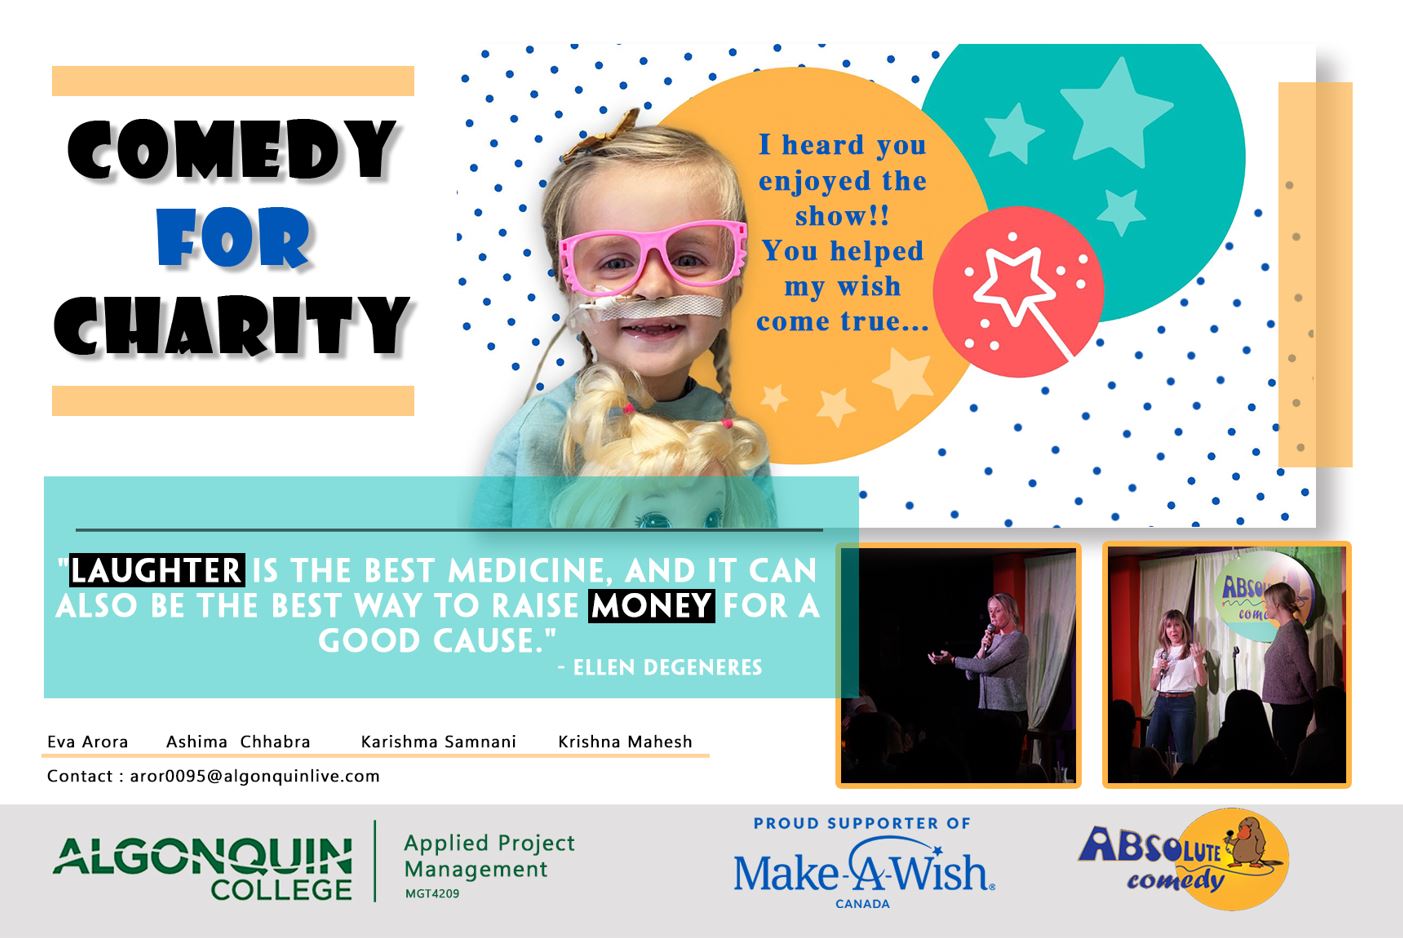 The comedy night event was held at Absolute comedy to raise funds for Make a Wish charity.